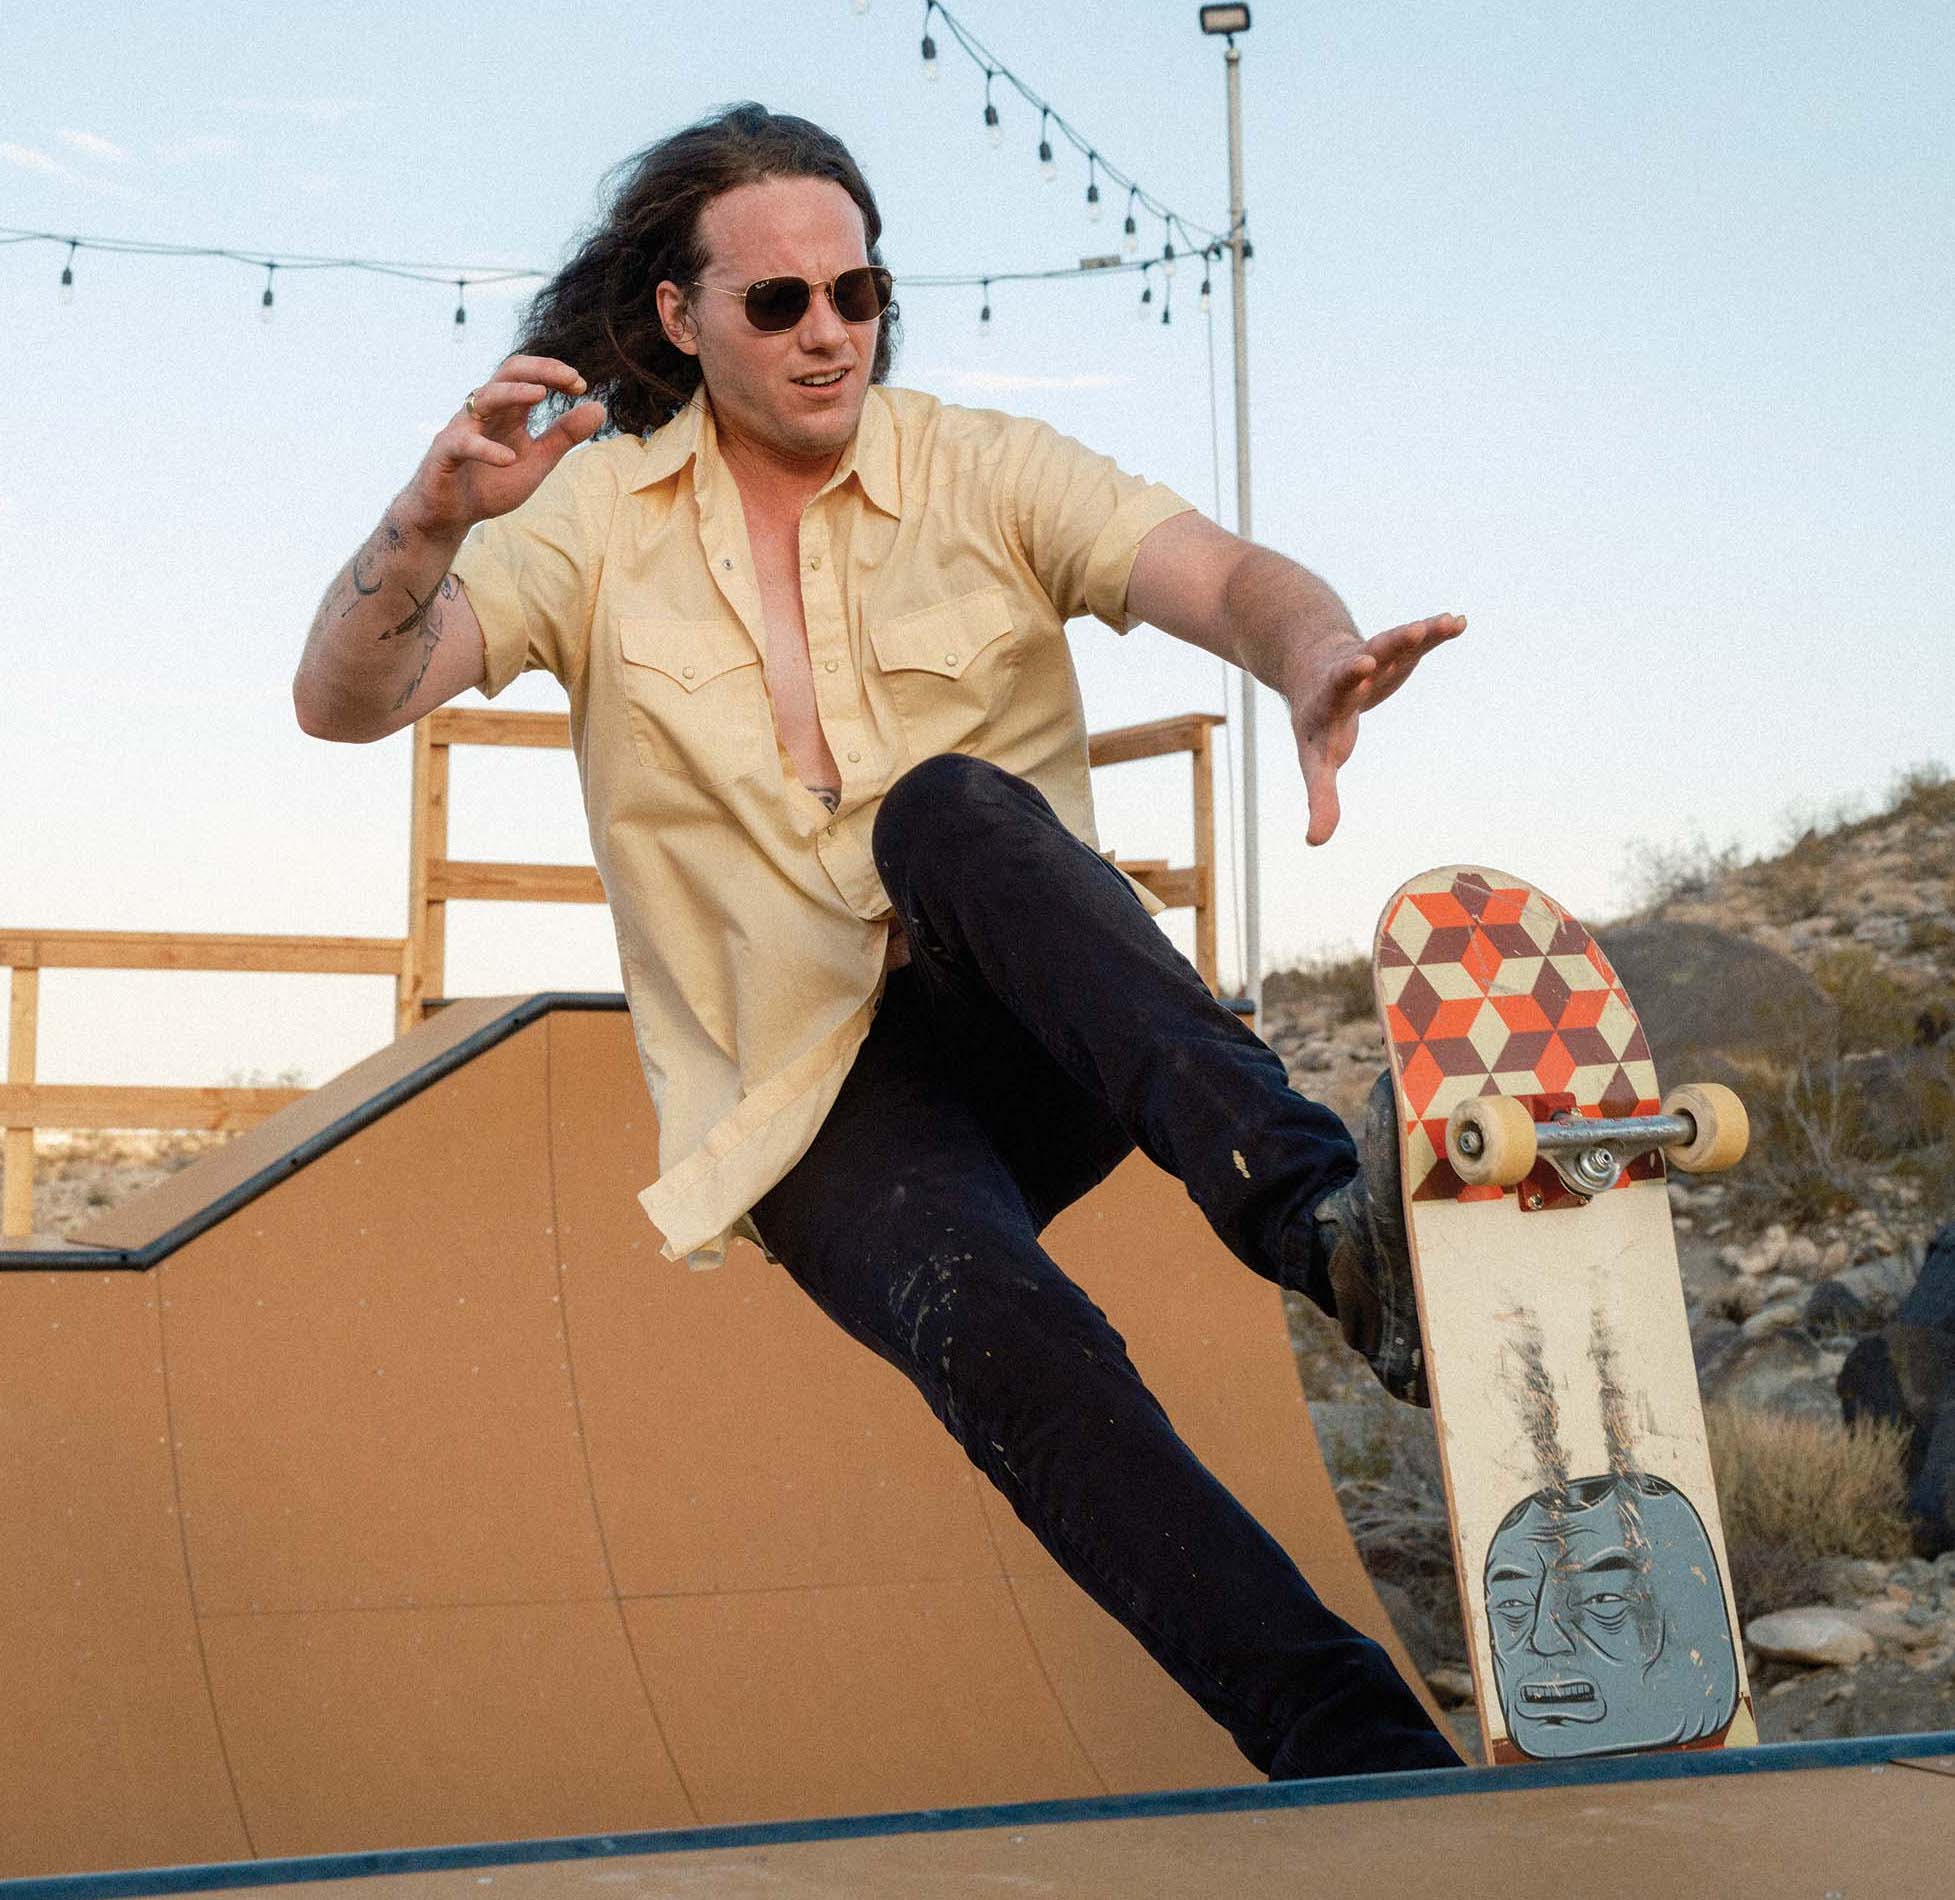 Masonic skateboarder Joey Buicce does a trick on a halfpipe in Yucca Valley.